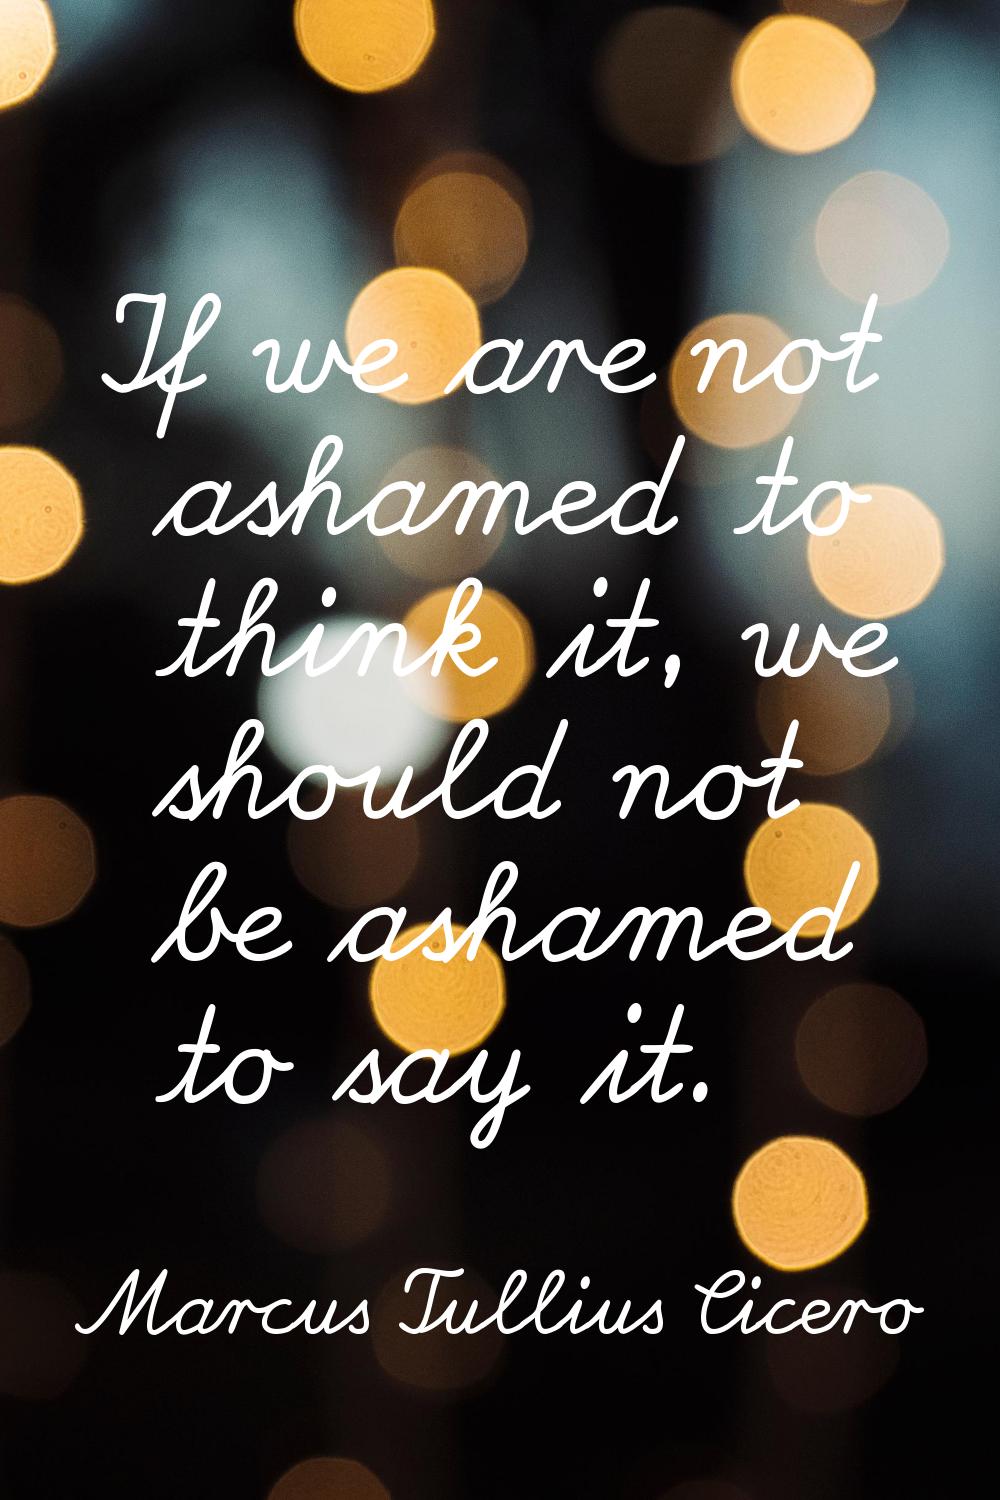 If we are not ashamed to think it, we should not be ashamed to say it.